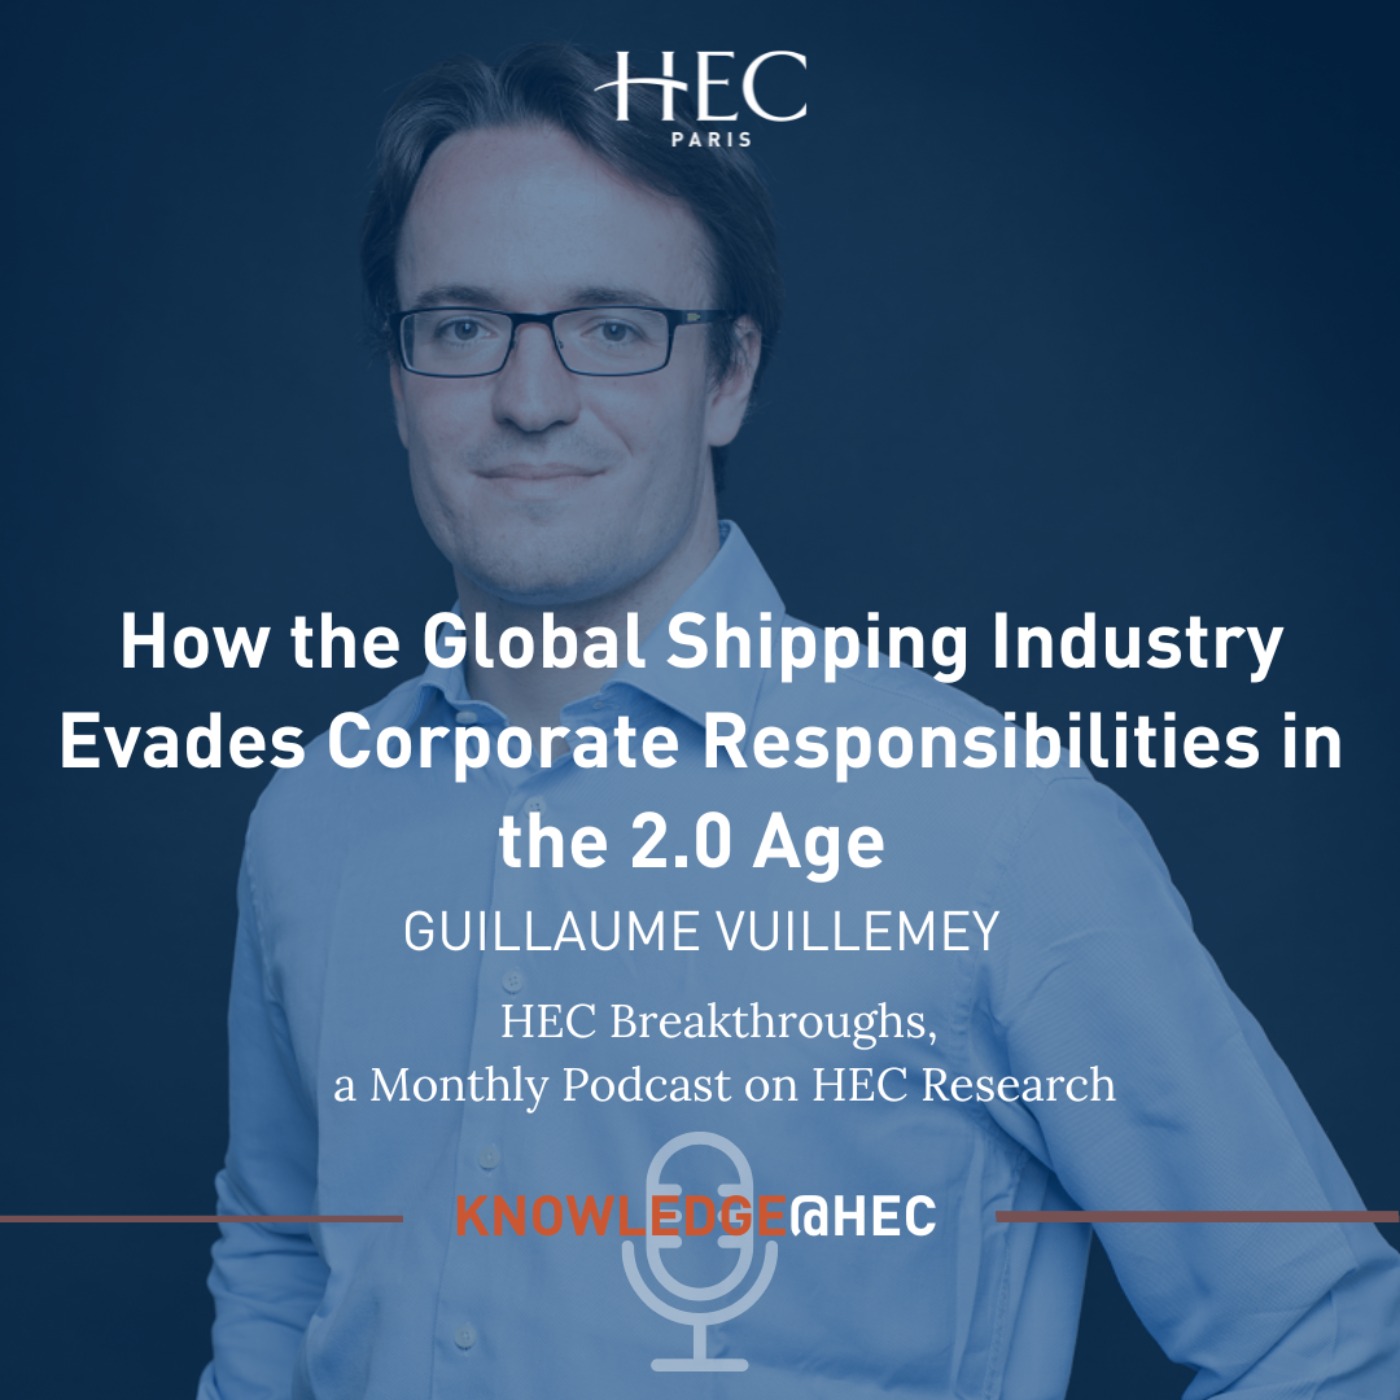 How the Global Shipping Industry Evades Corporate Responsibilities in the 2.0 Age